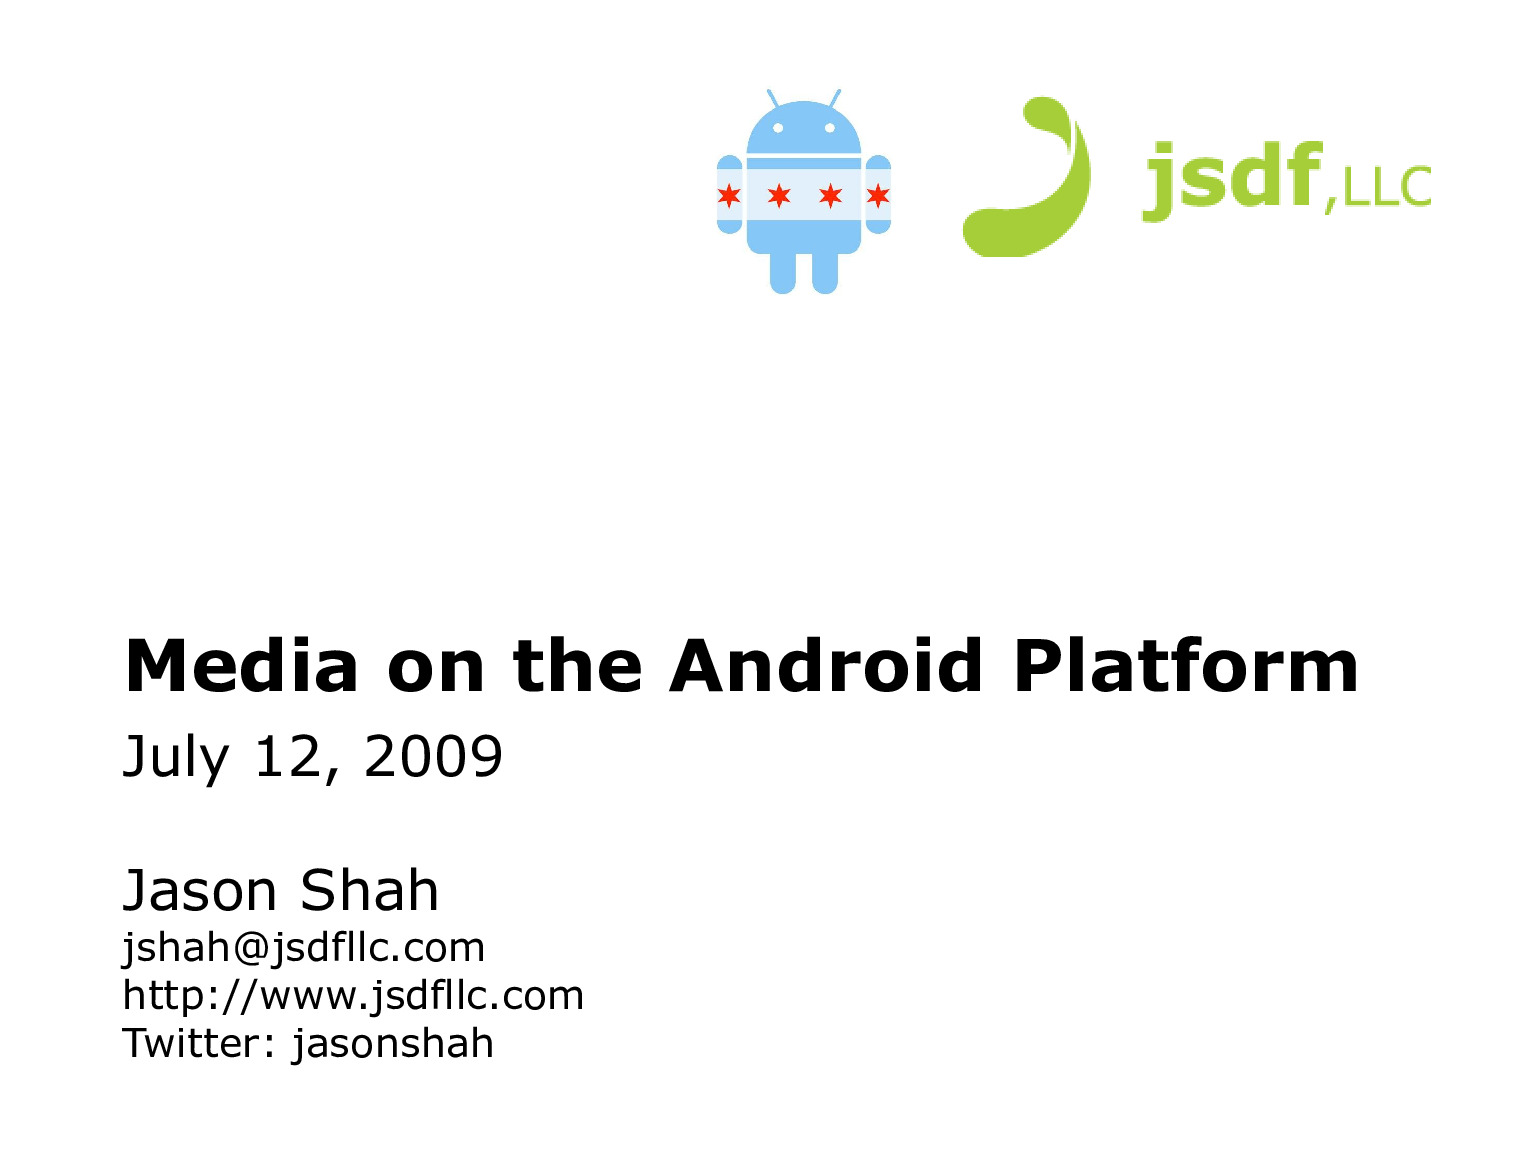 18539875-Media-on-the-Android-Platform